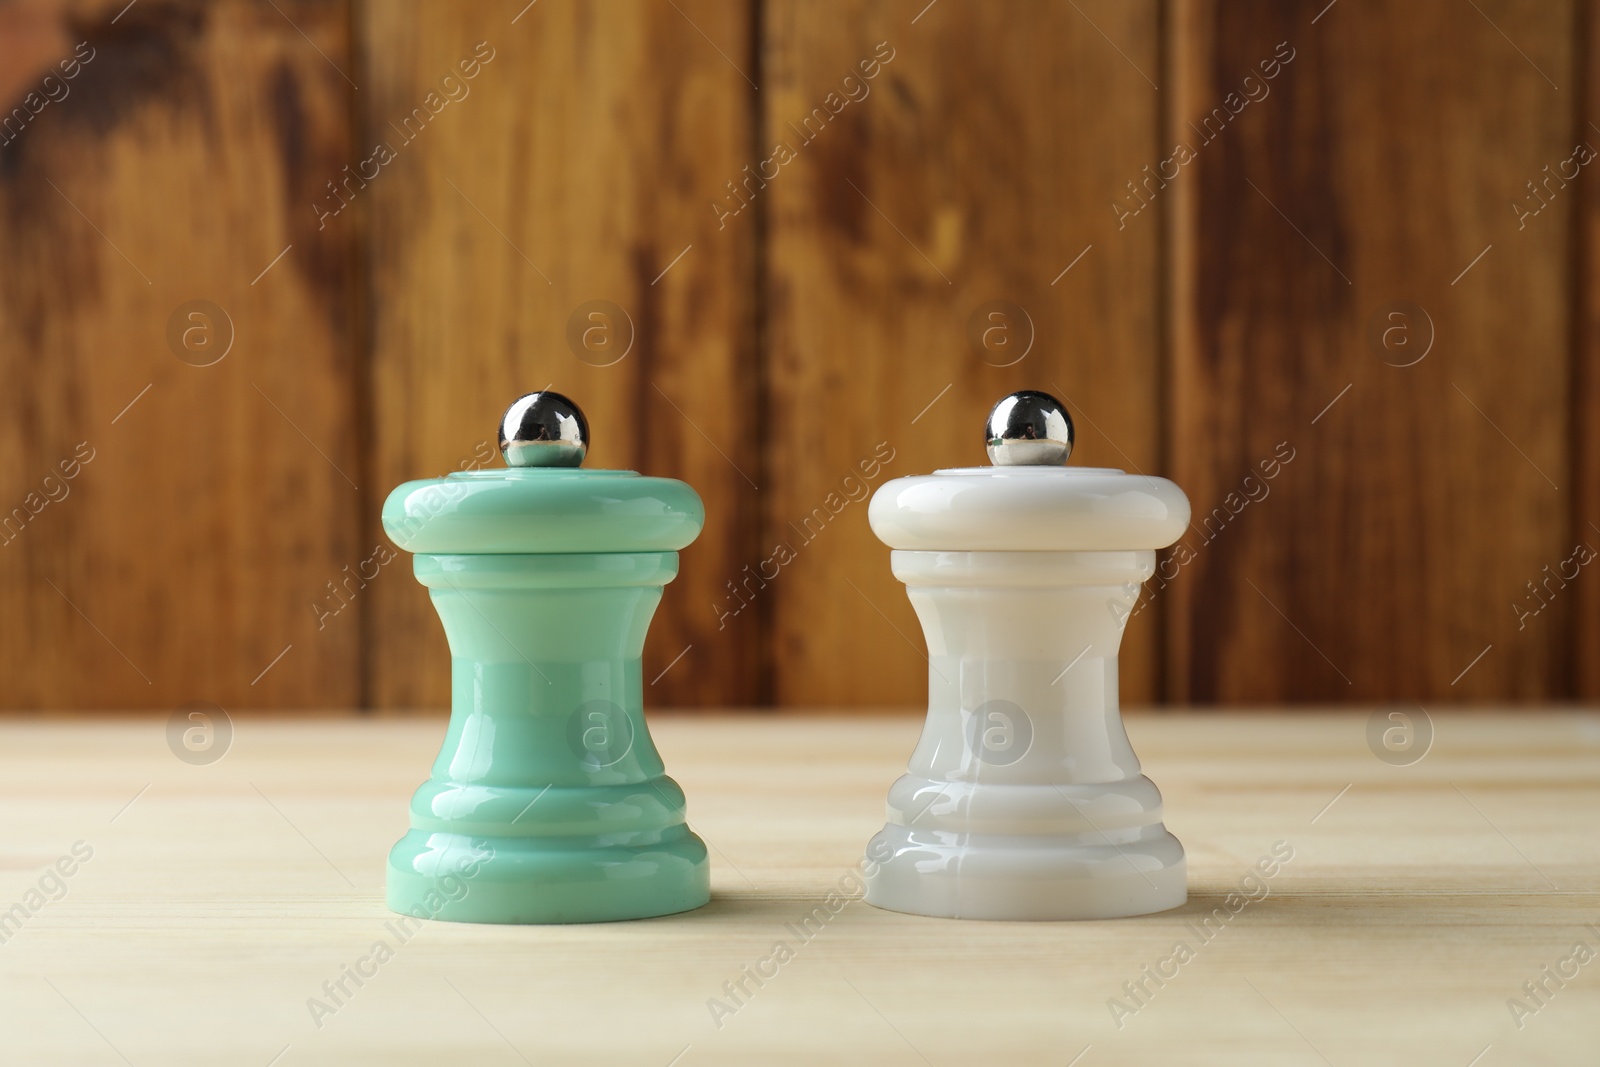 Photo of Salt and pepper shakers on light wooden table